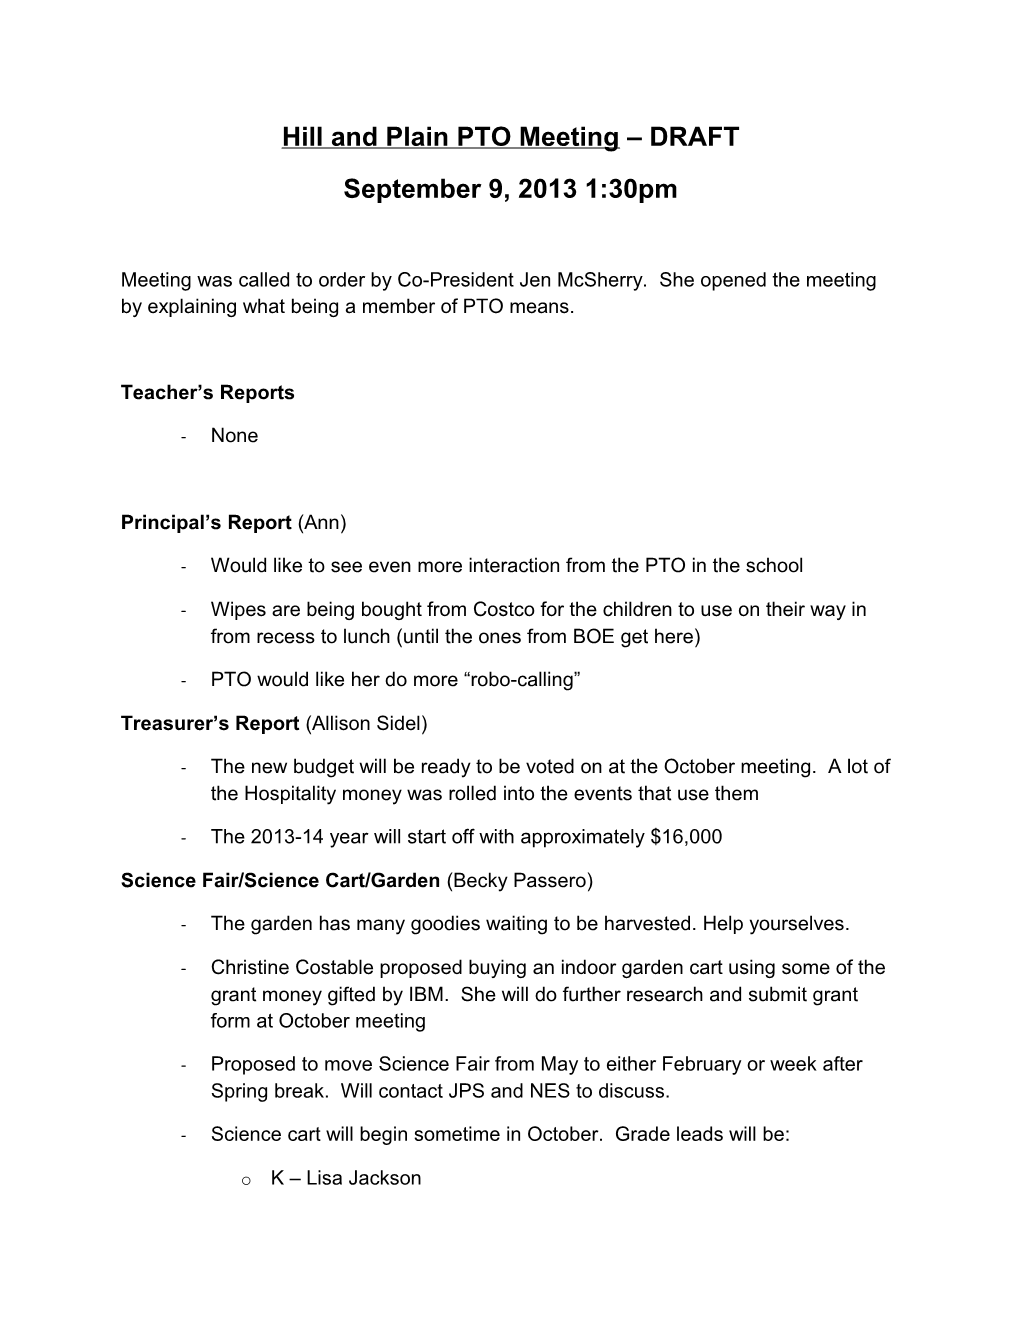 Hill and Plain PTO Meeting DRAFT